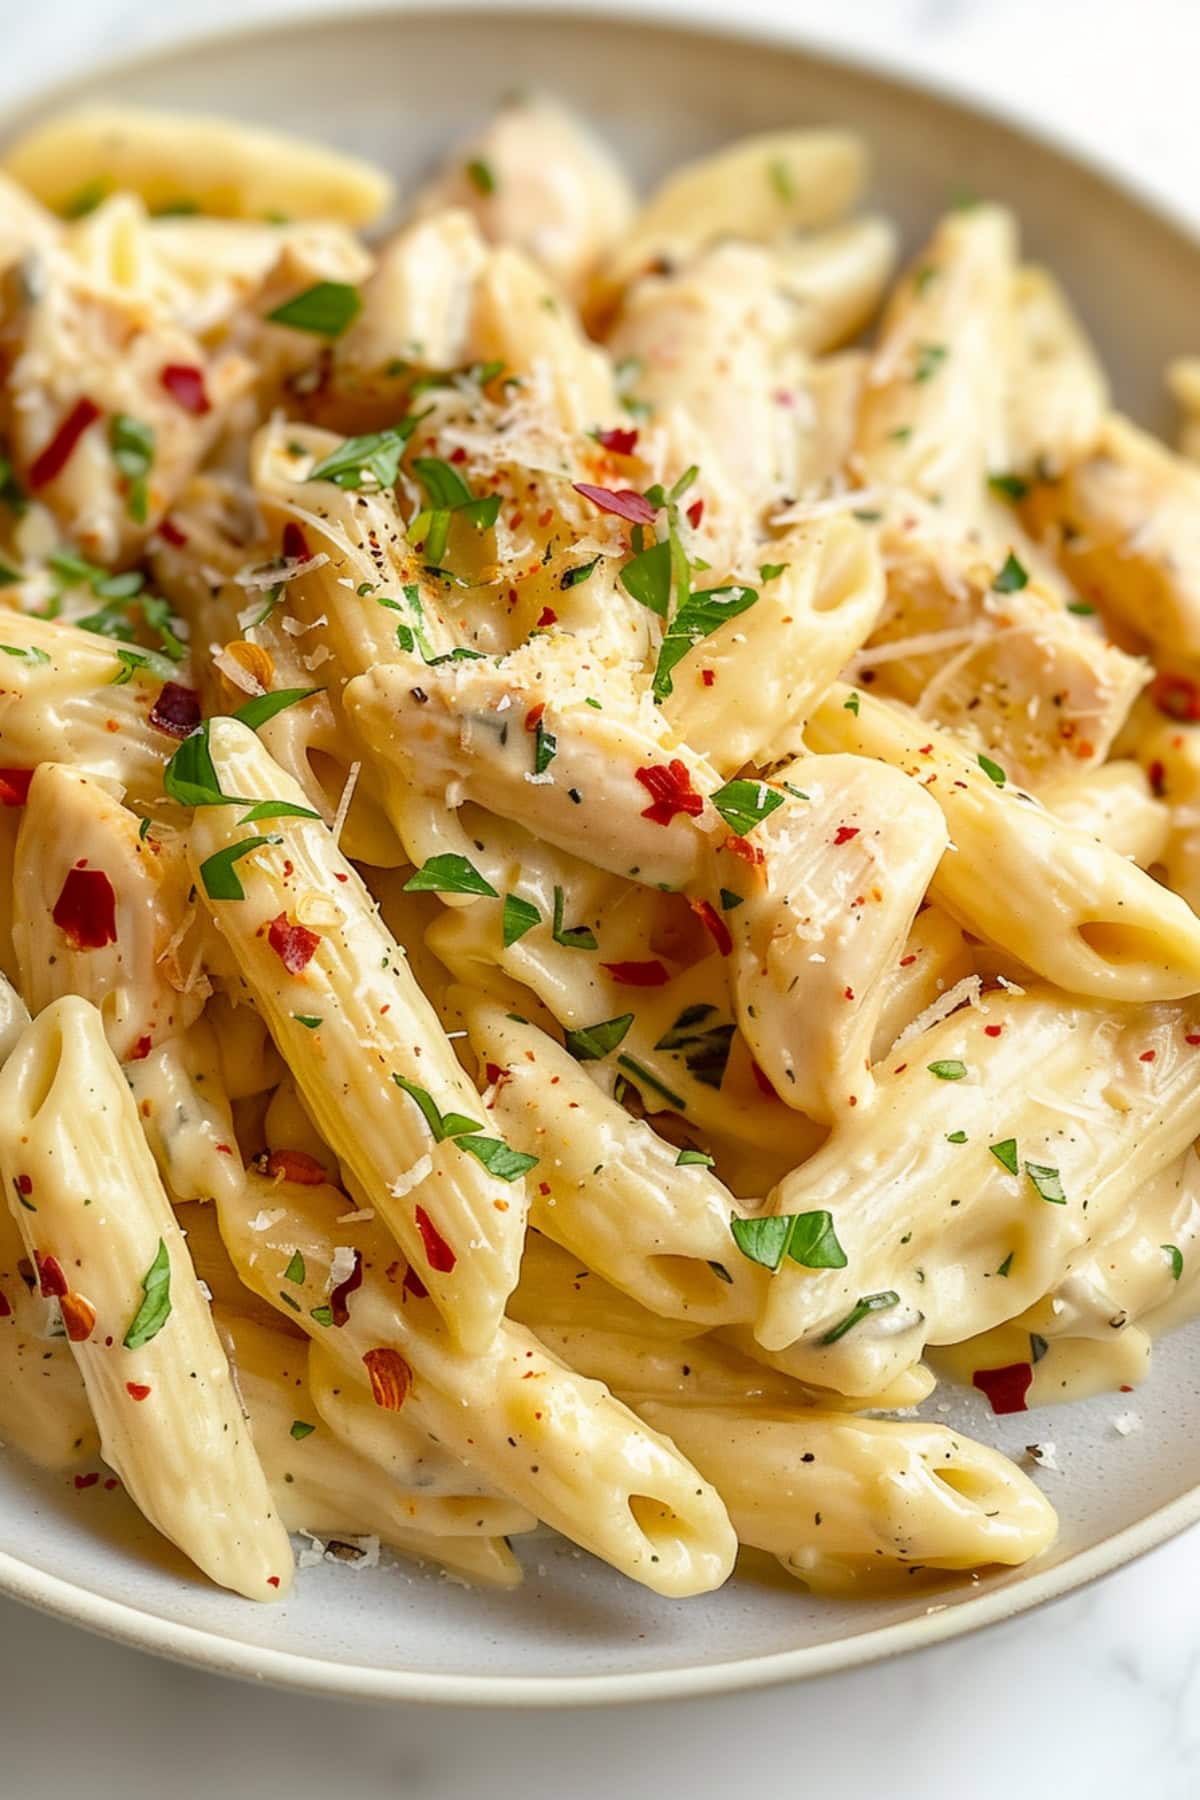 A close-up of the cheesy, creamy garlic parmesan chicken pasta, showcasing the rich sauce.